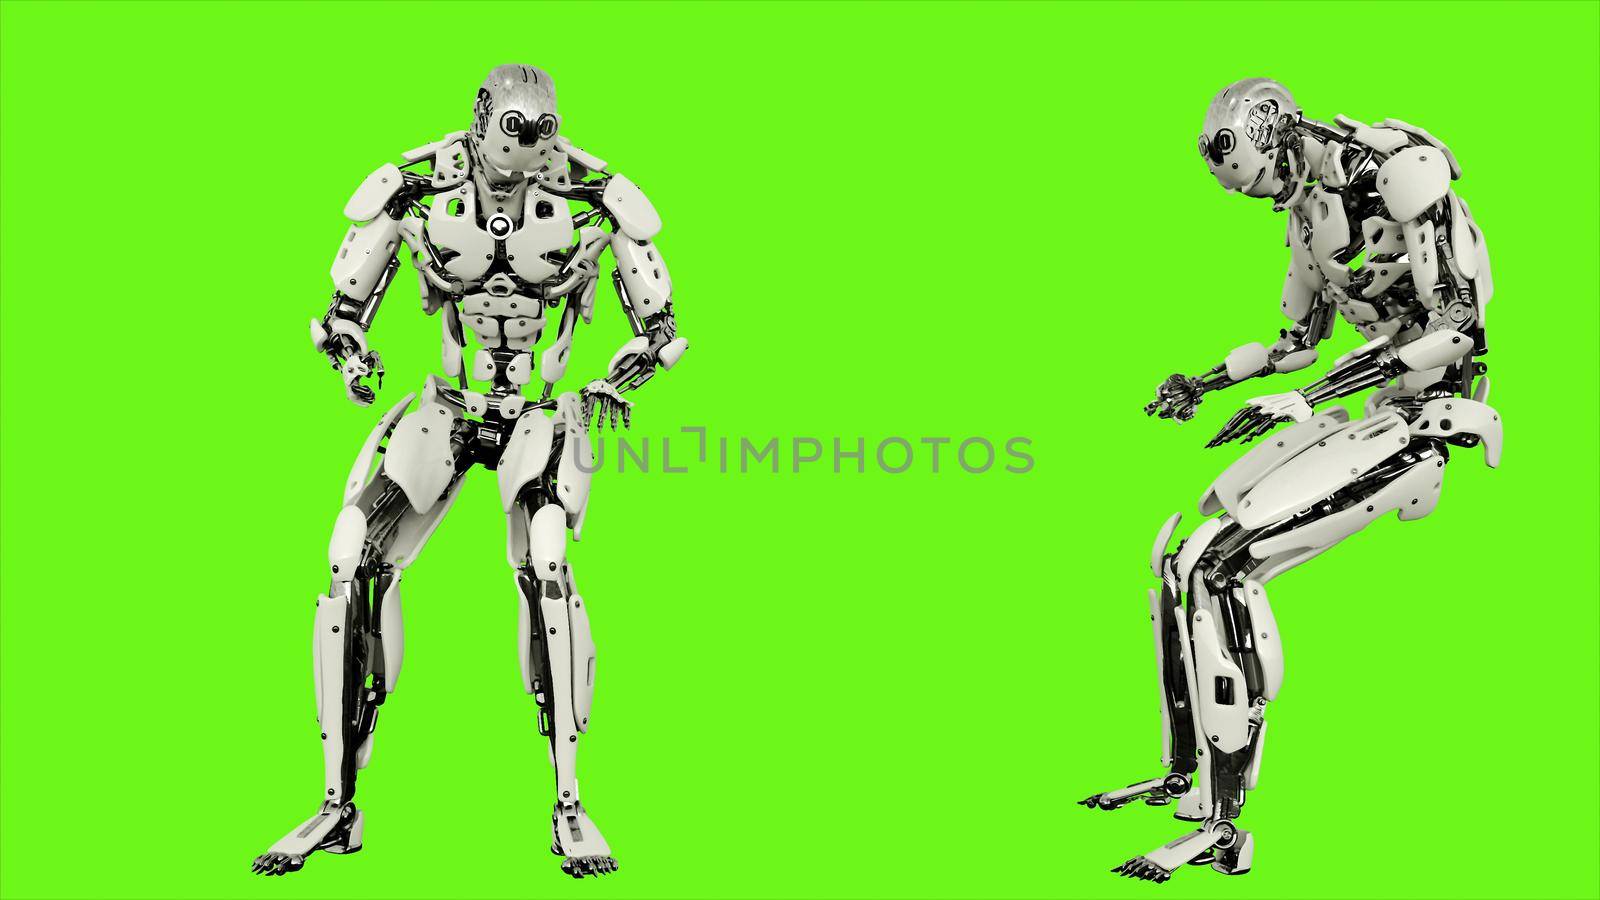 Robot android is banging fist. Illustration on green screen background.